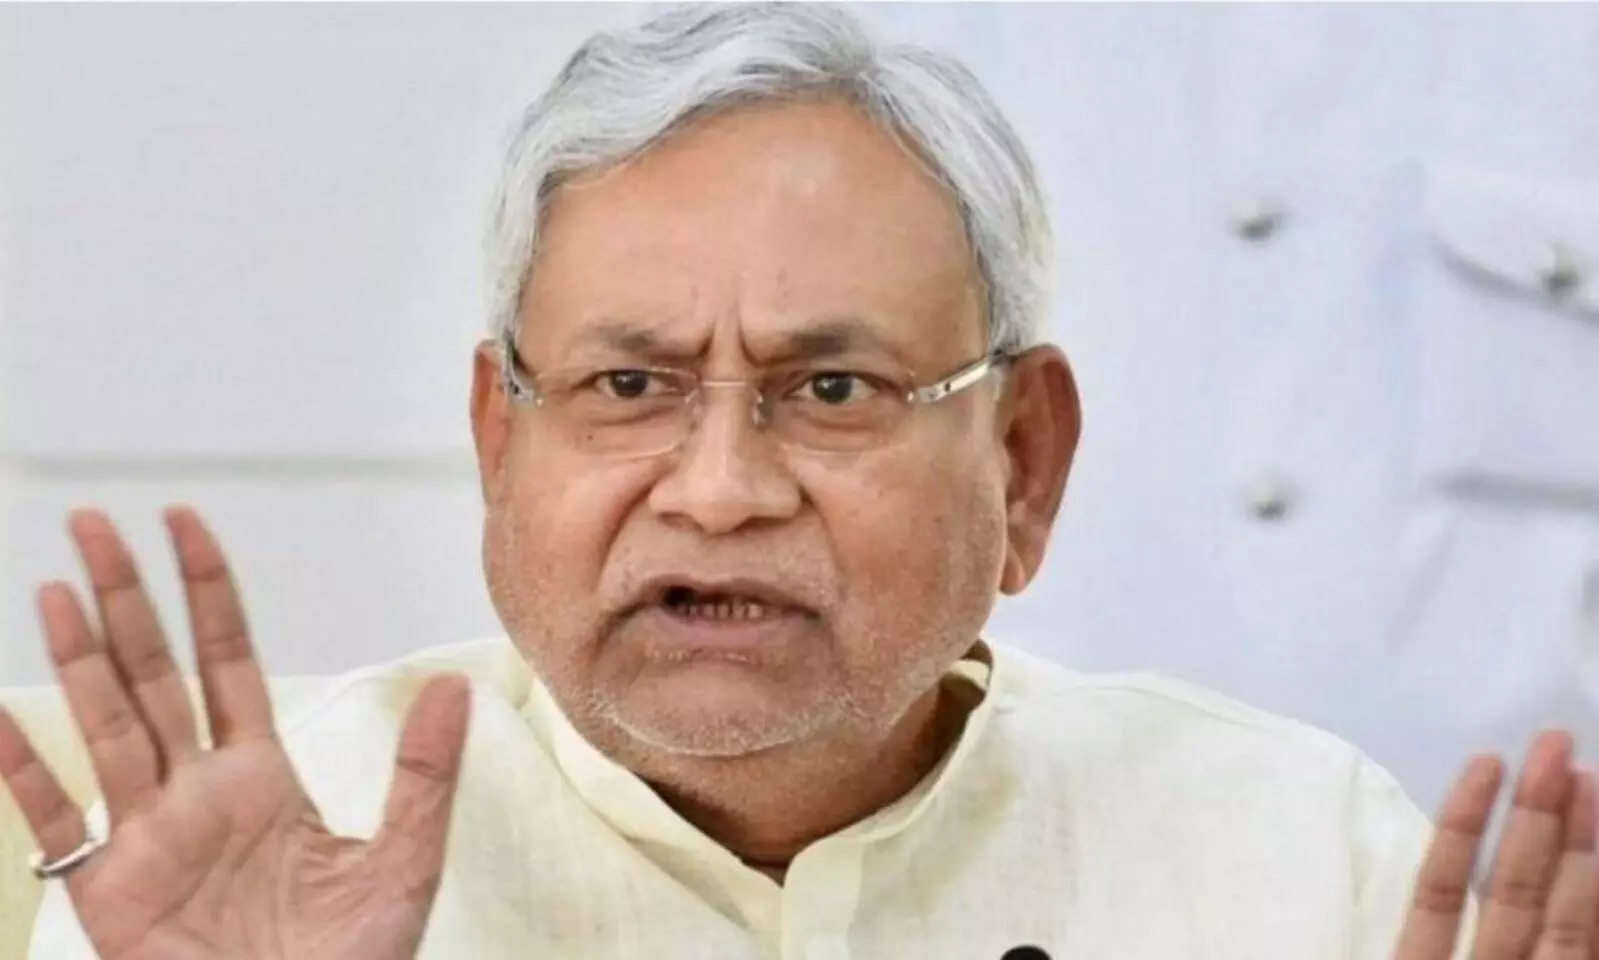 Irregularities took place when RJD was sharing power, things are being investigated claims Nitish Kumar